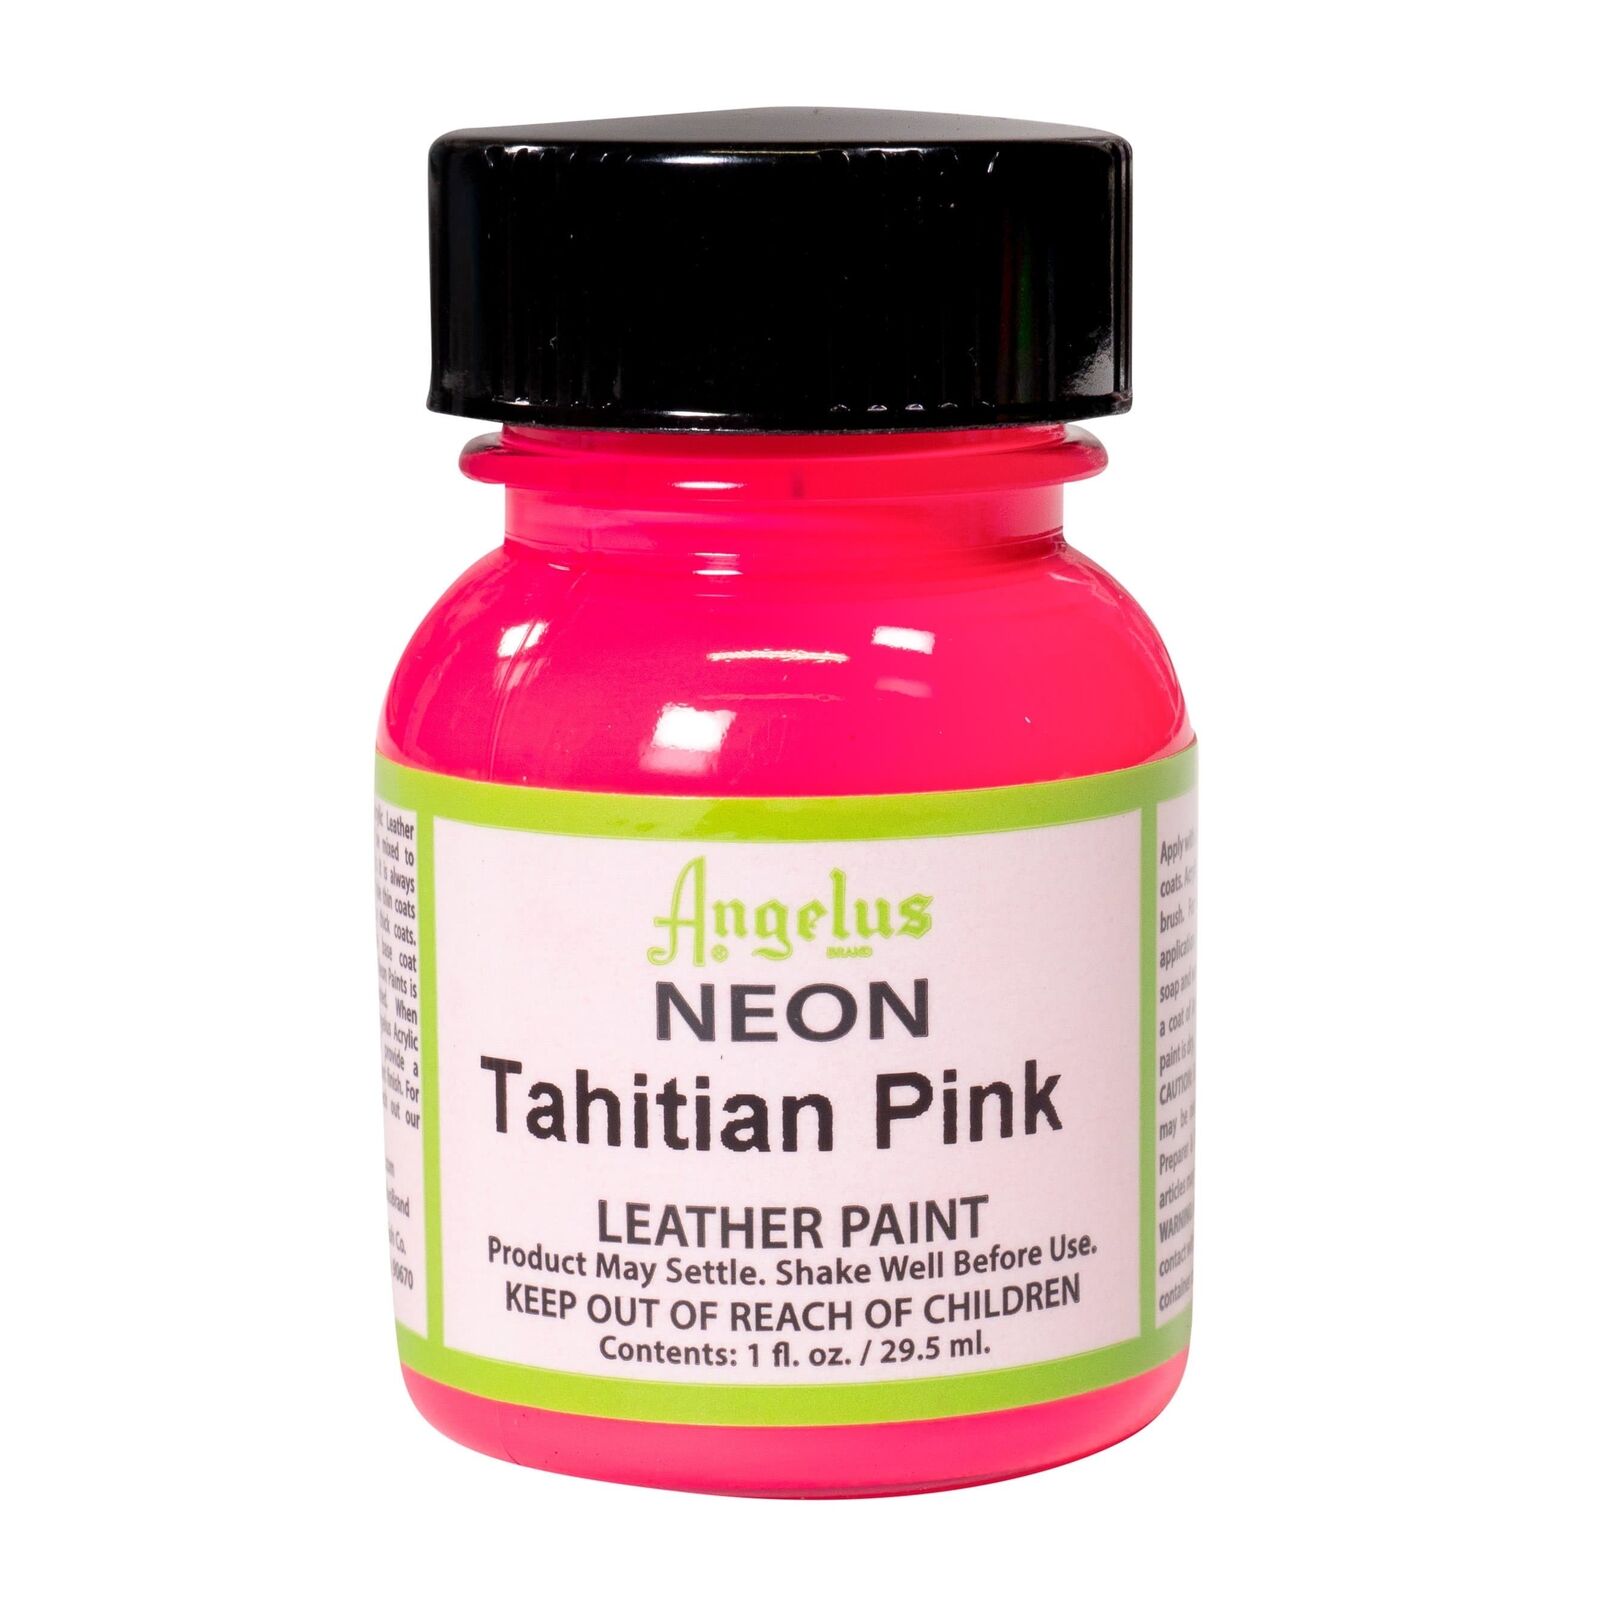 Angelus brand 付与 Neon ギフト TAHITIAN PINK leather acrylic paint oz. 1